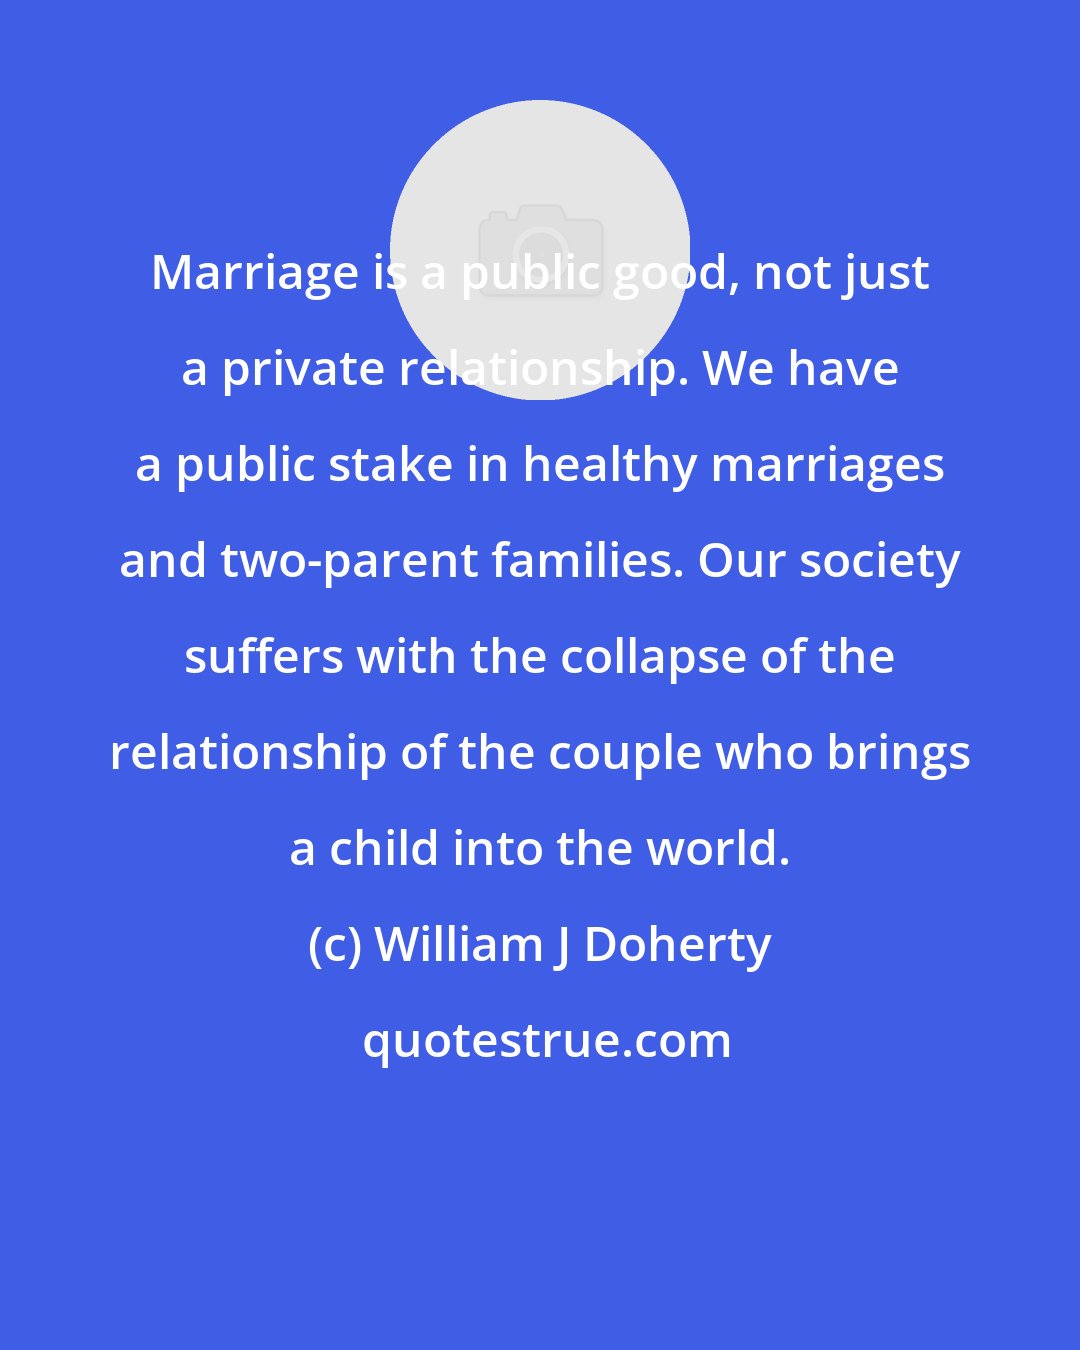 William J Doherty: Marriage is a public good, not just a private relationship. We have a public stake in healthy marriages and two-parent families. Our society suffers with the collapse of the relationship of the couple who brings a child into the world.